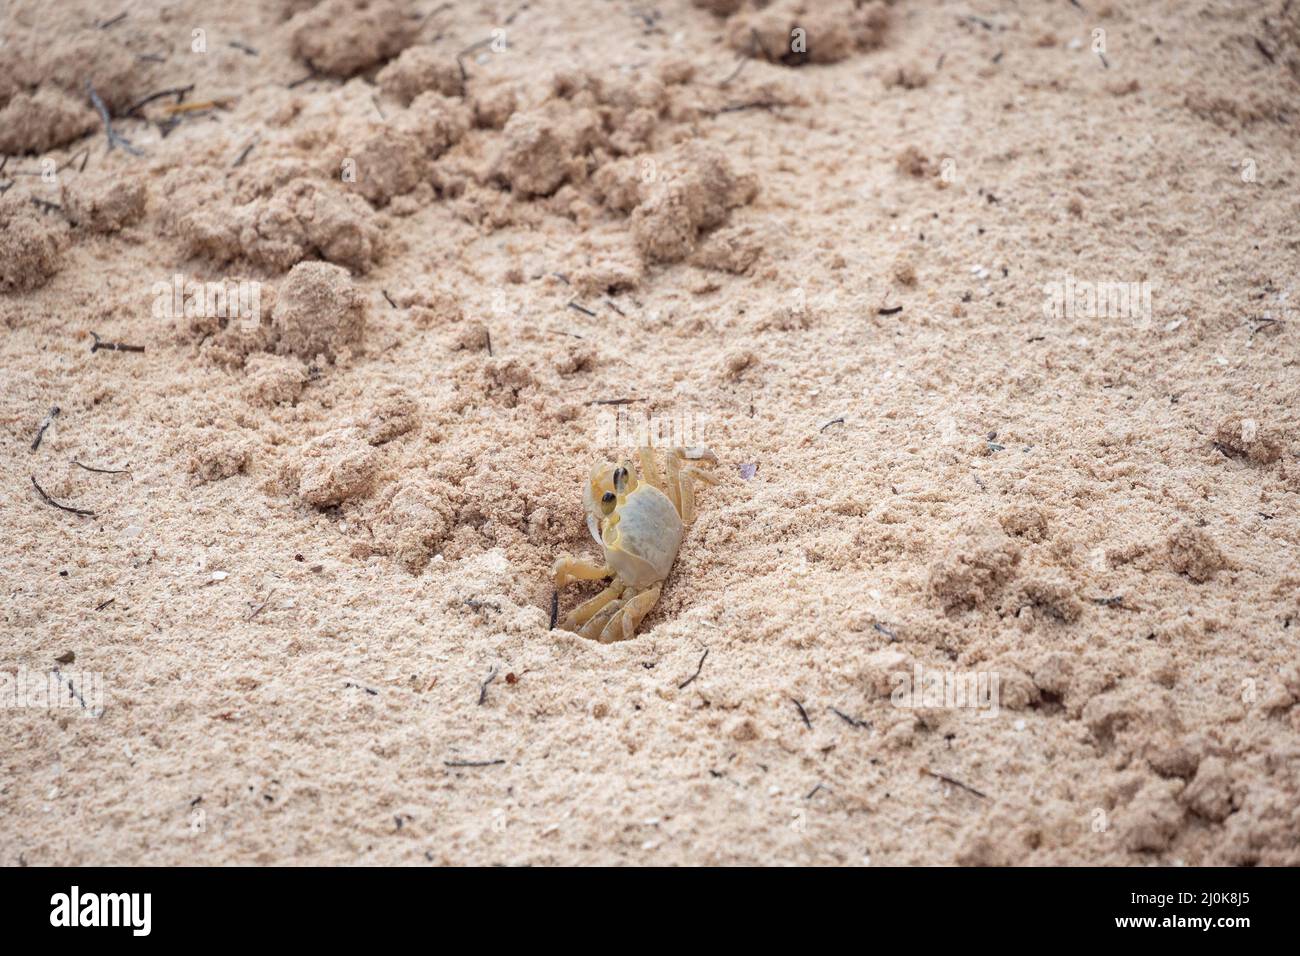 White Crab Digging out Sand to Make a Deeper Hole Stock Photo